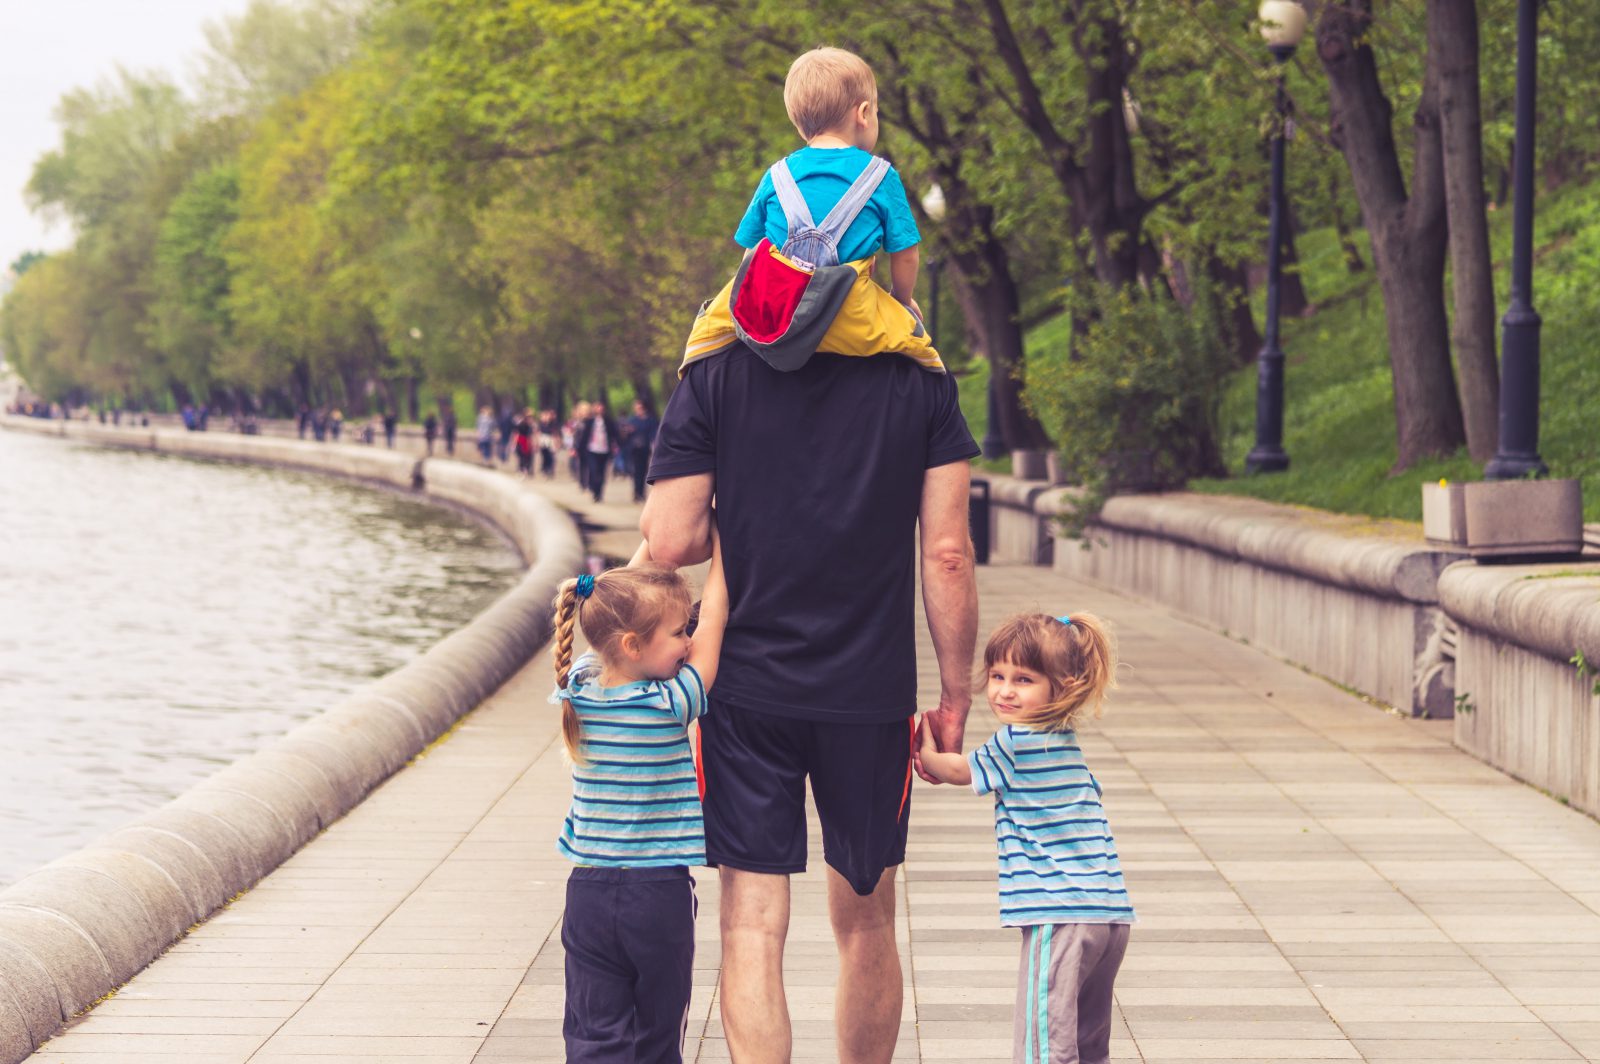 Last month, new research from the Institute for Family Studies demonstrated, once again, how important fathers are, especially for boys. For example, boys growing up without their dads are only half as likely to graduate from college as their peers who live with dad at home.